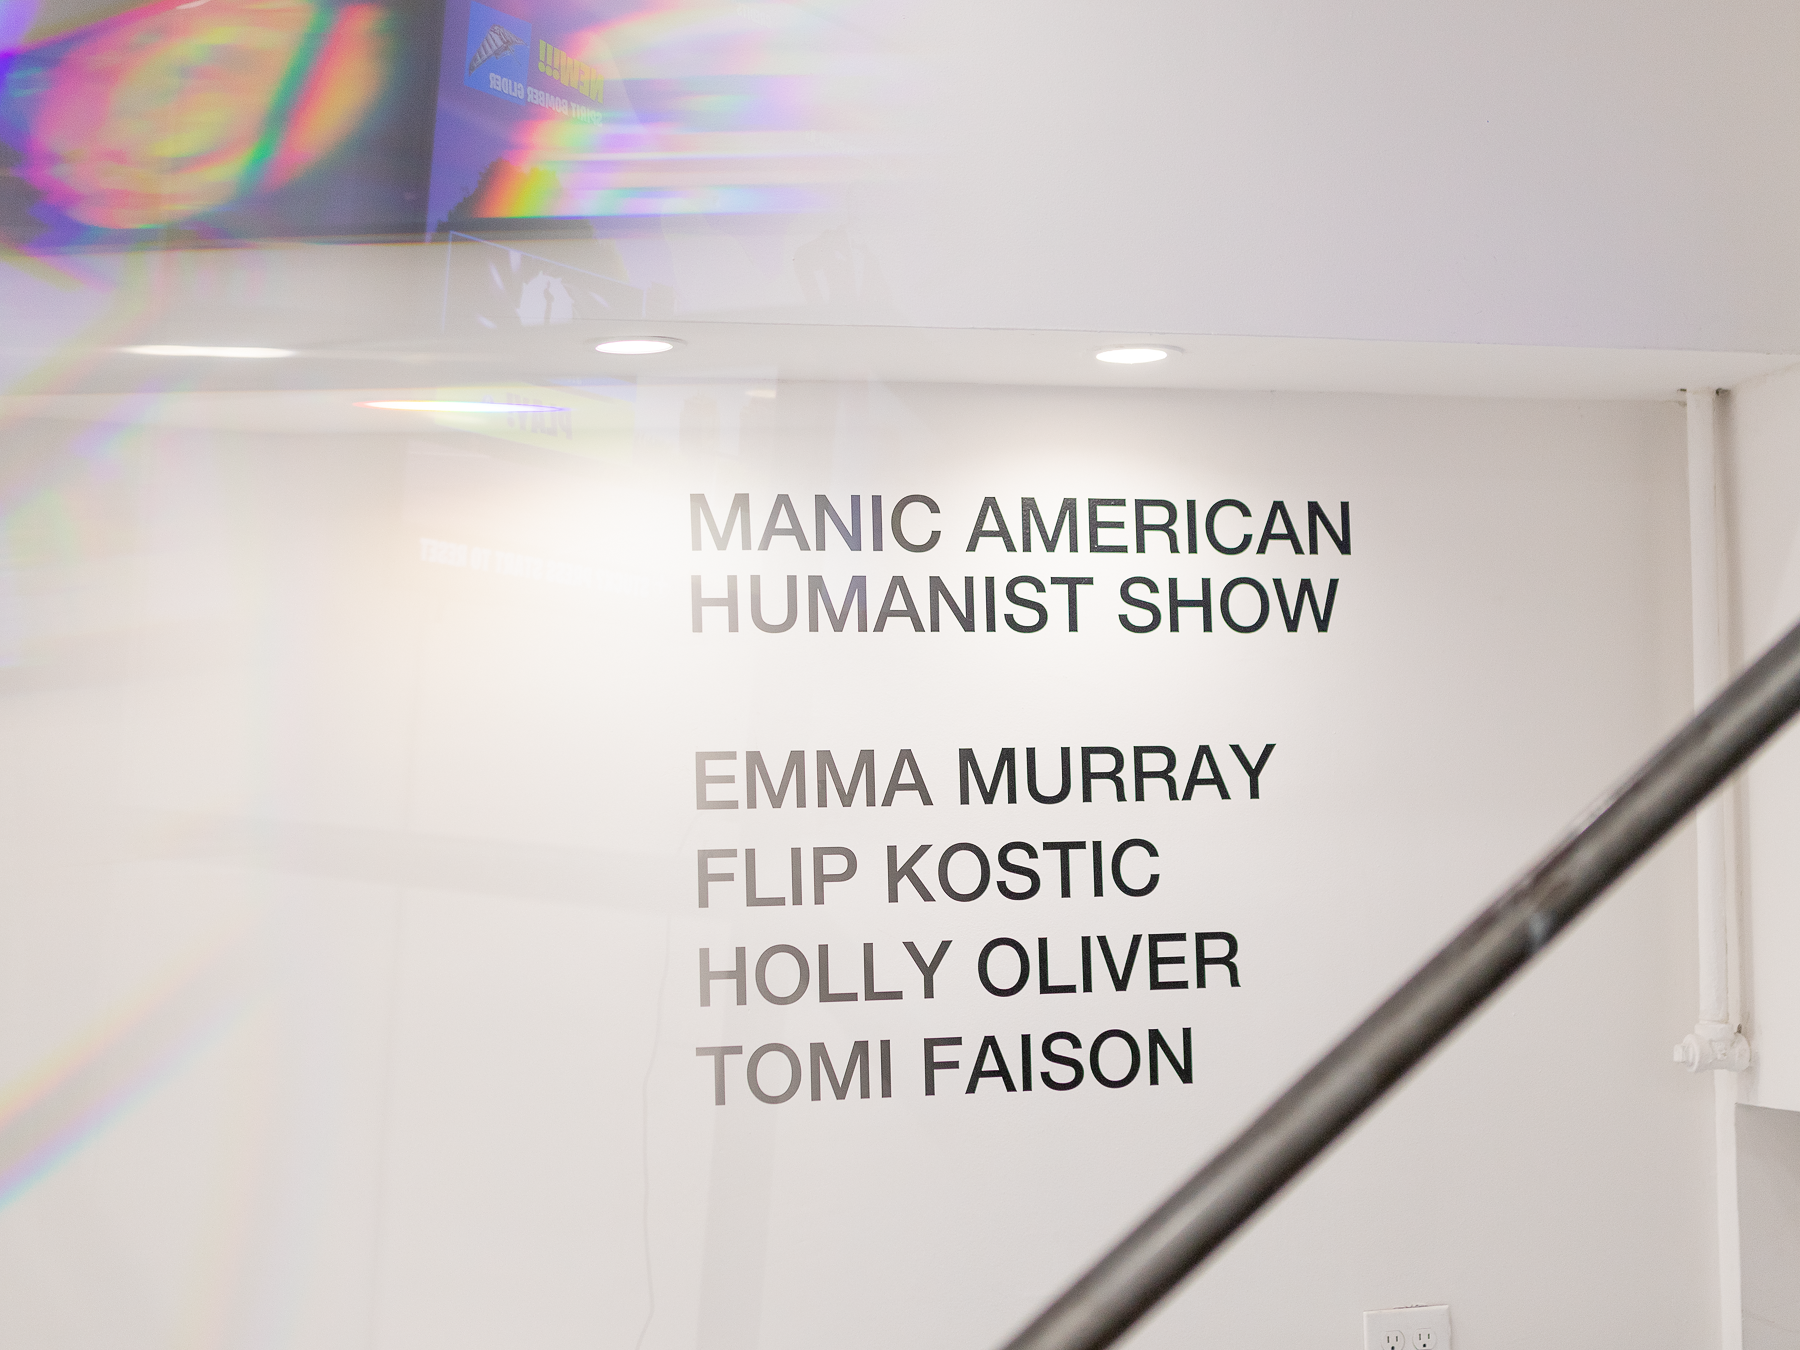 REVIEW: The Manic American Humanist Show